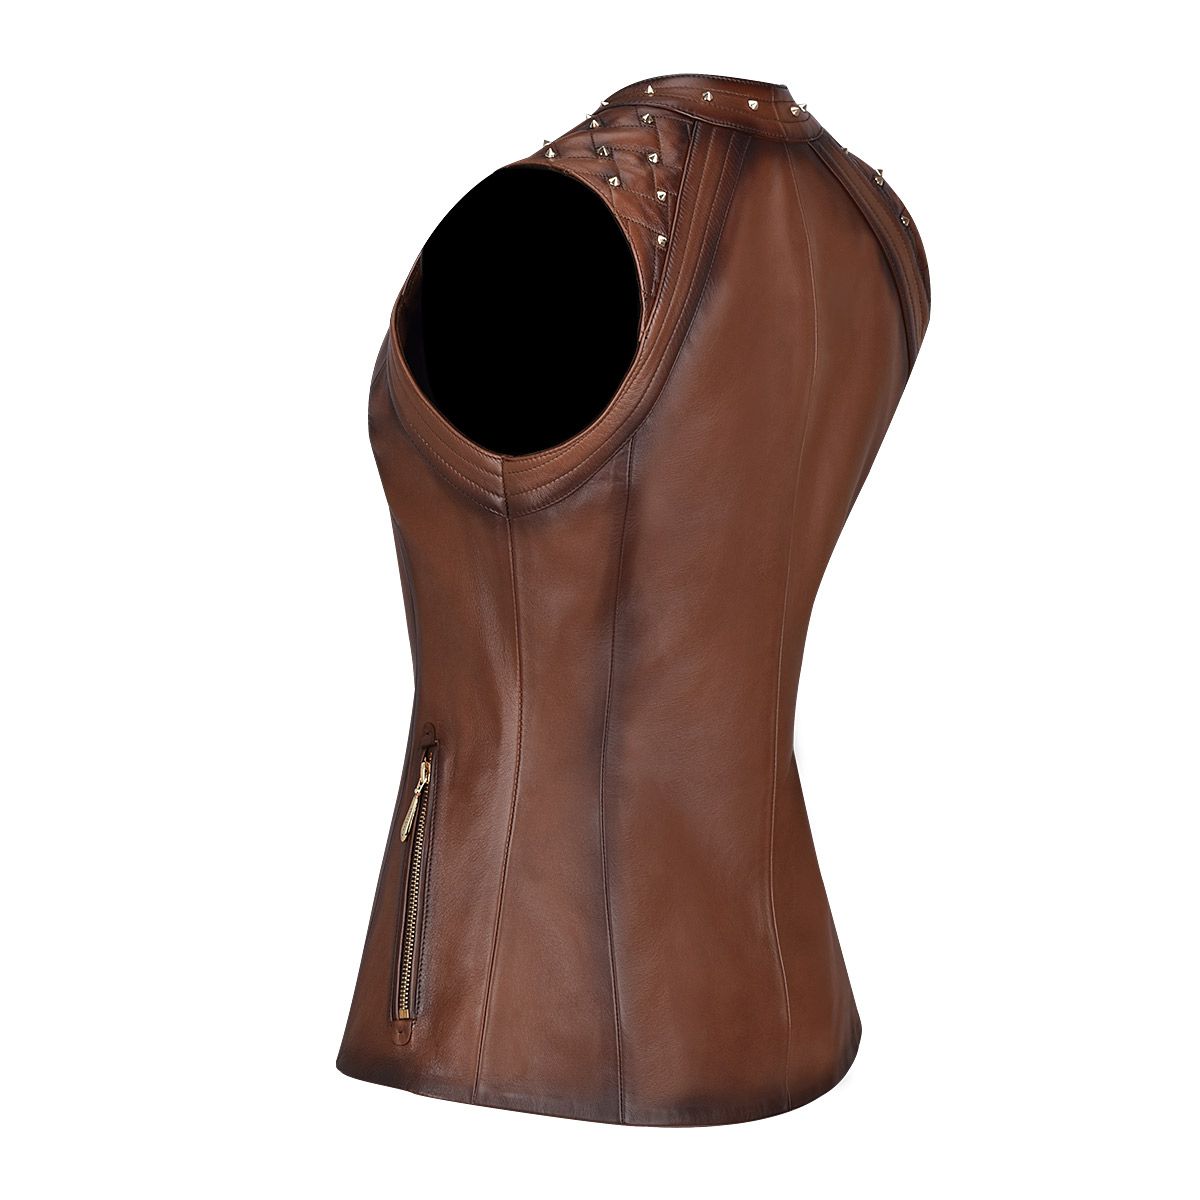 Shoulder pads leather vest, Ovine leather vest for women. It features metal shoulder pads and quilted embroidery on the shoulders. 